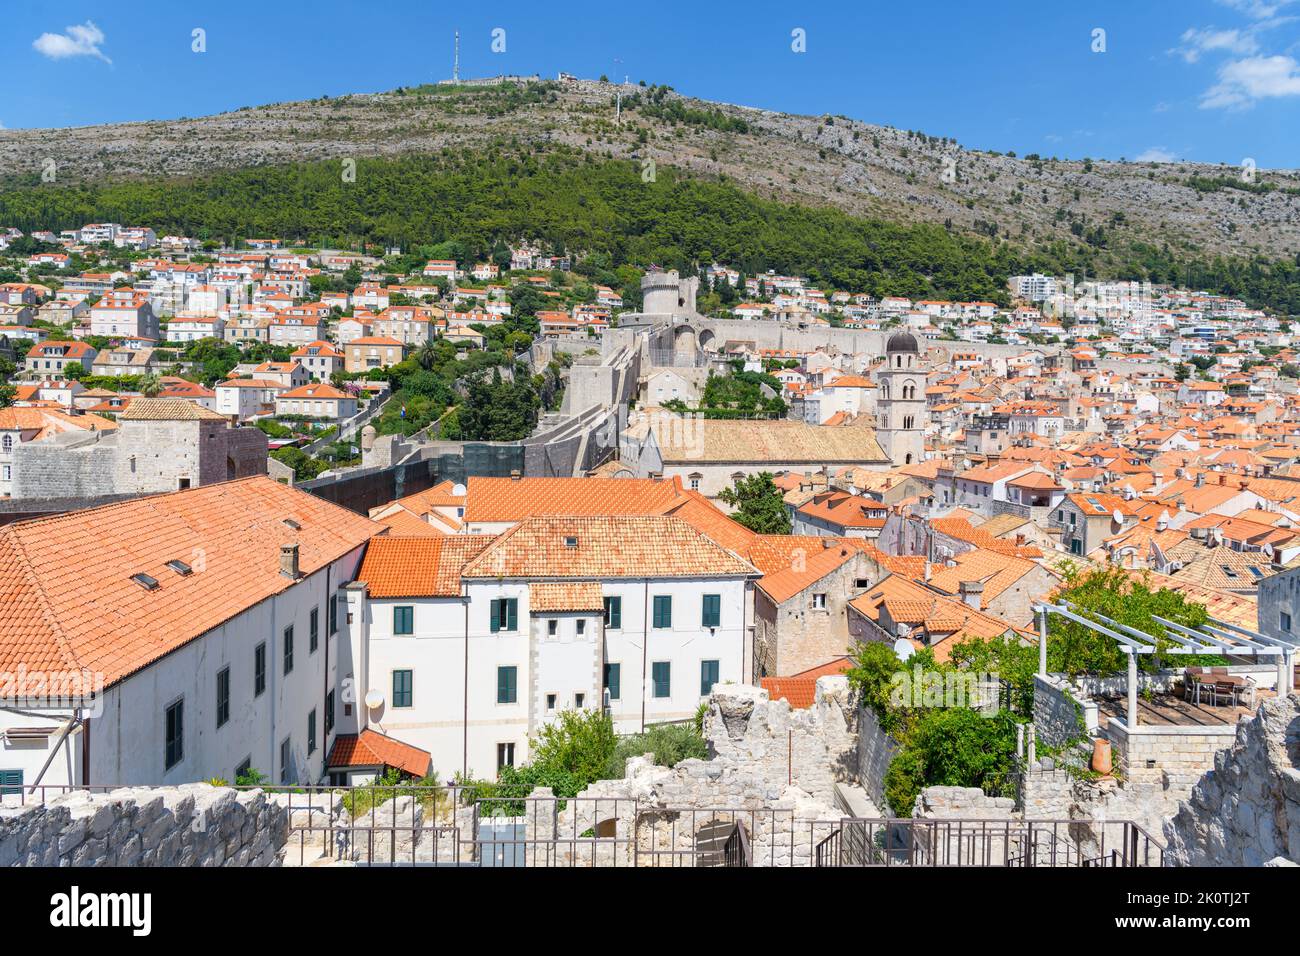 View over the rooftops towards the Pile Gate from the walls of the Old Town, Dubrovnik, Croatia Stock Photo